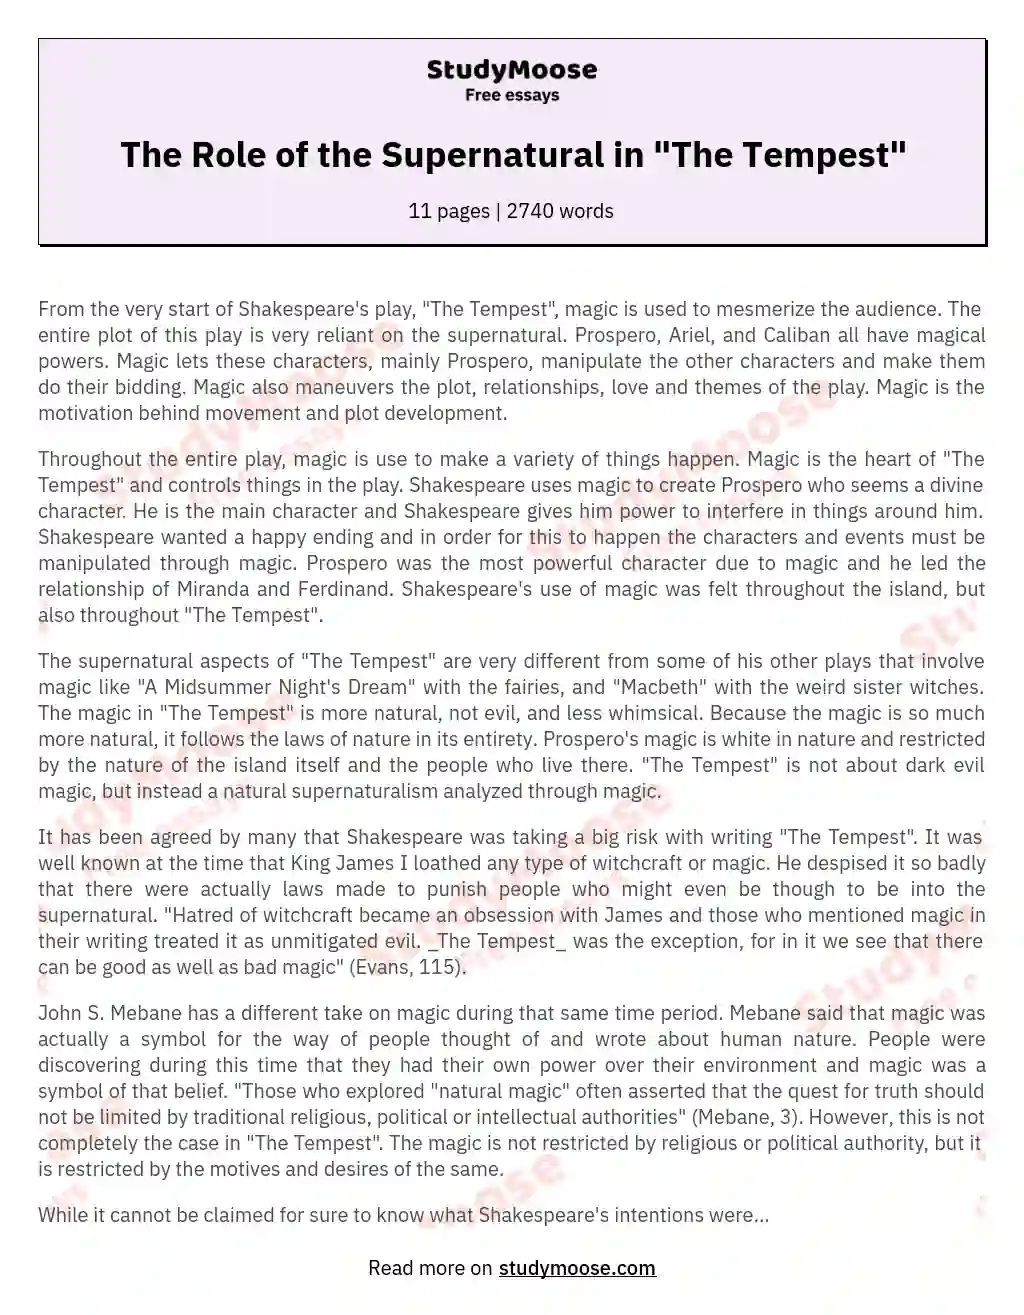 The Role of the Supernatural in "The Tempest" essay